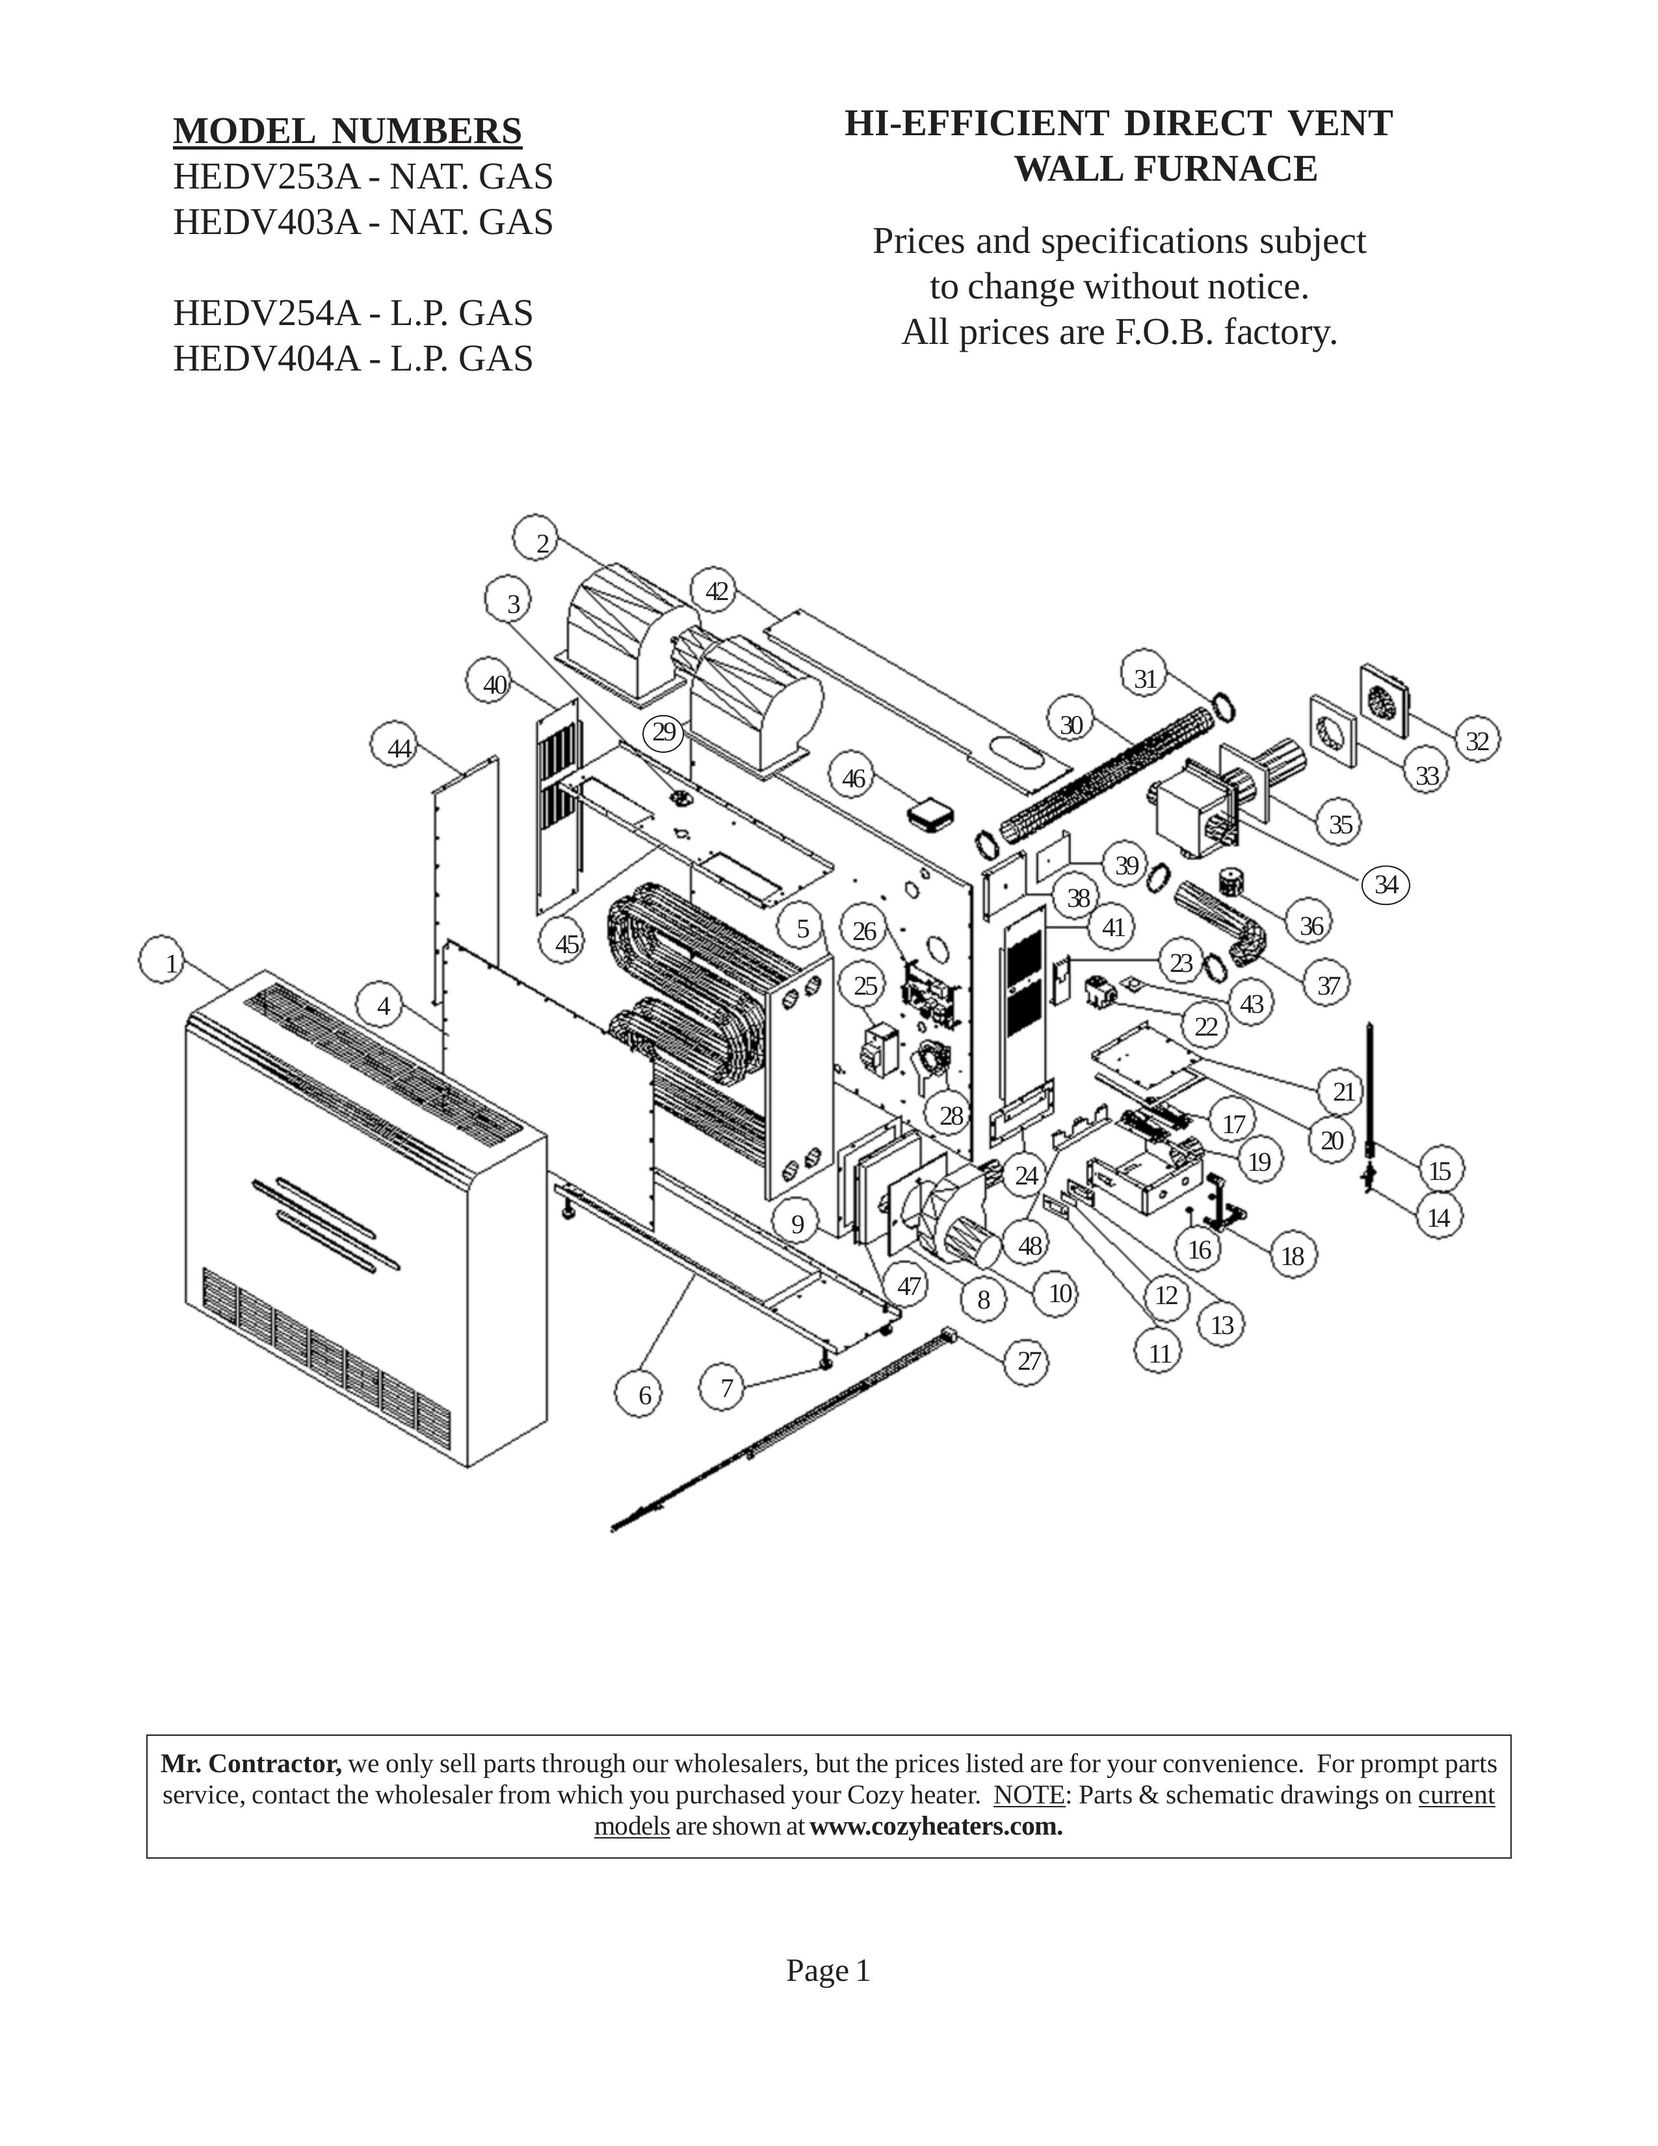 Louisville Tin and Stove HEDV253A Furnace User Manual